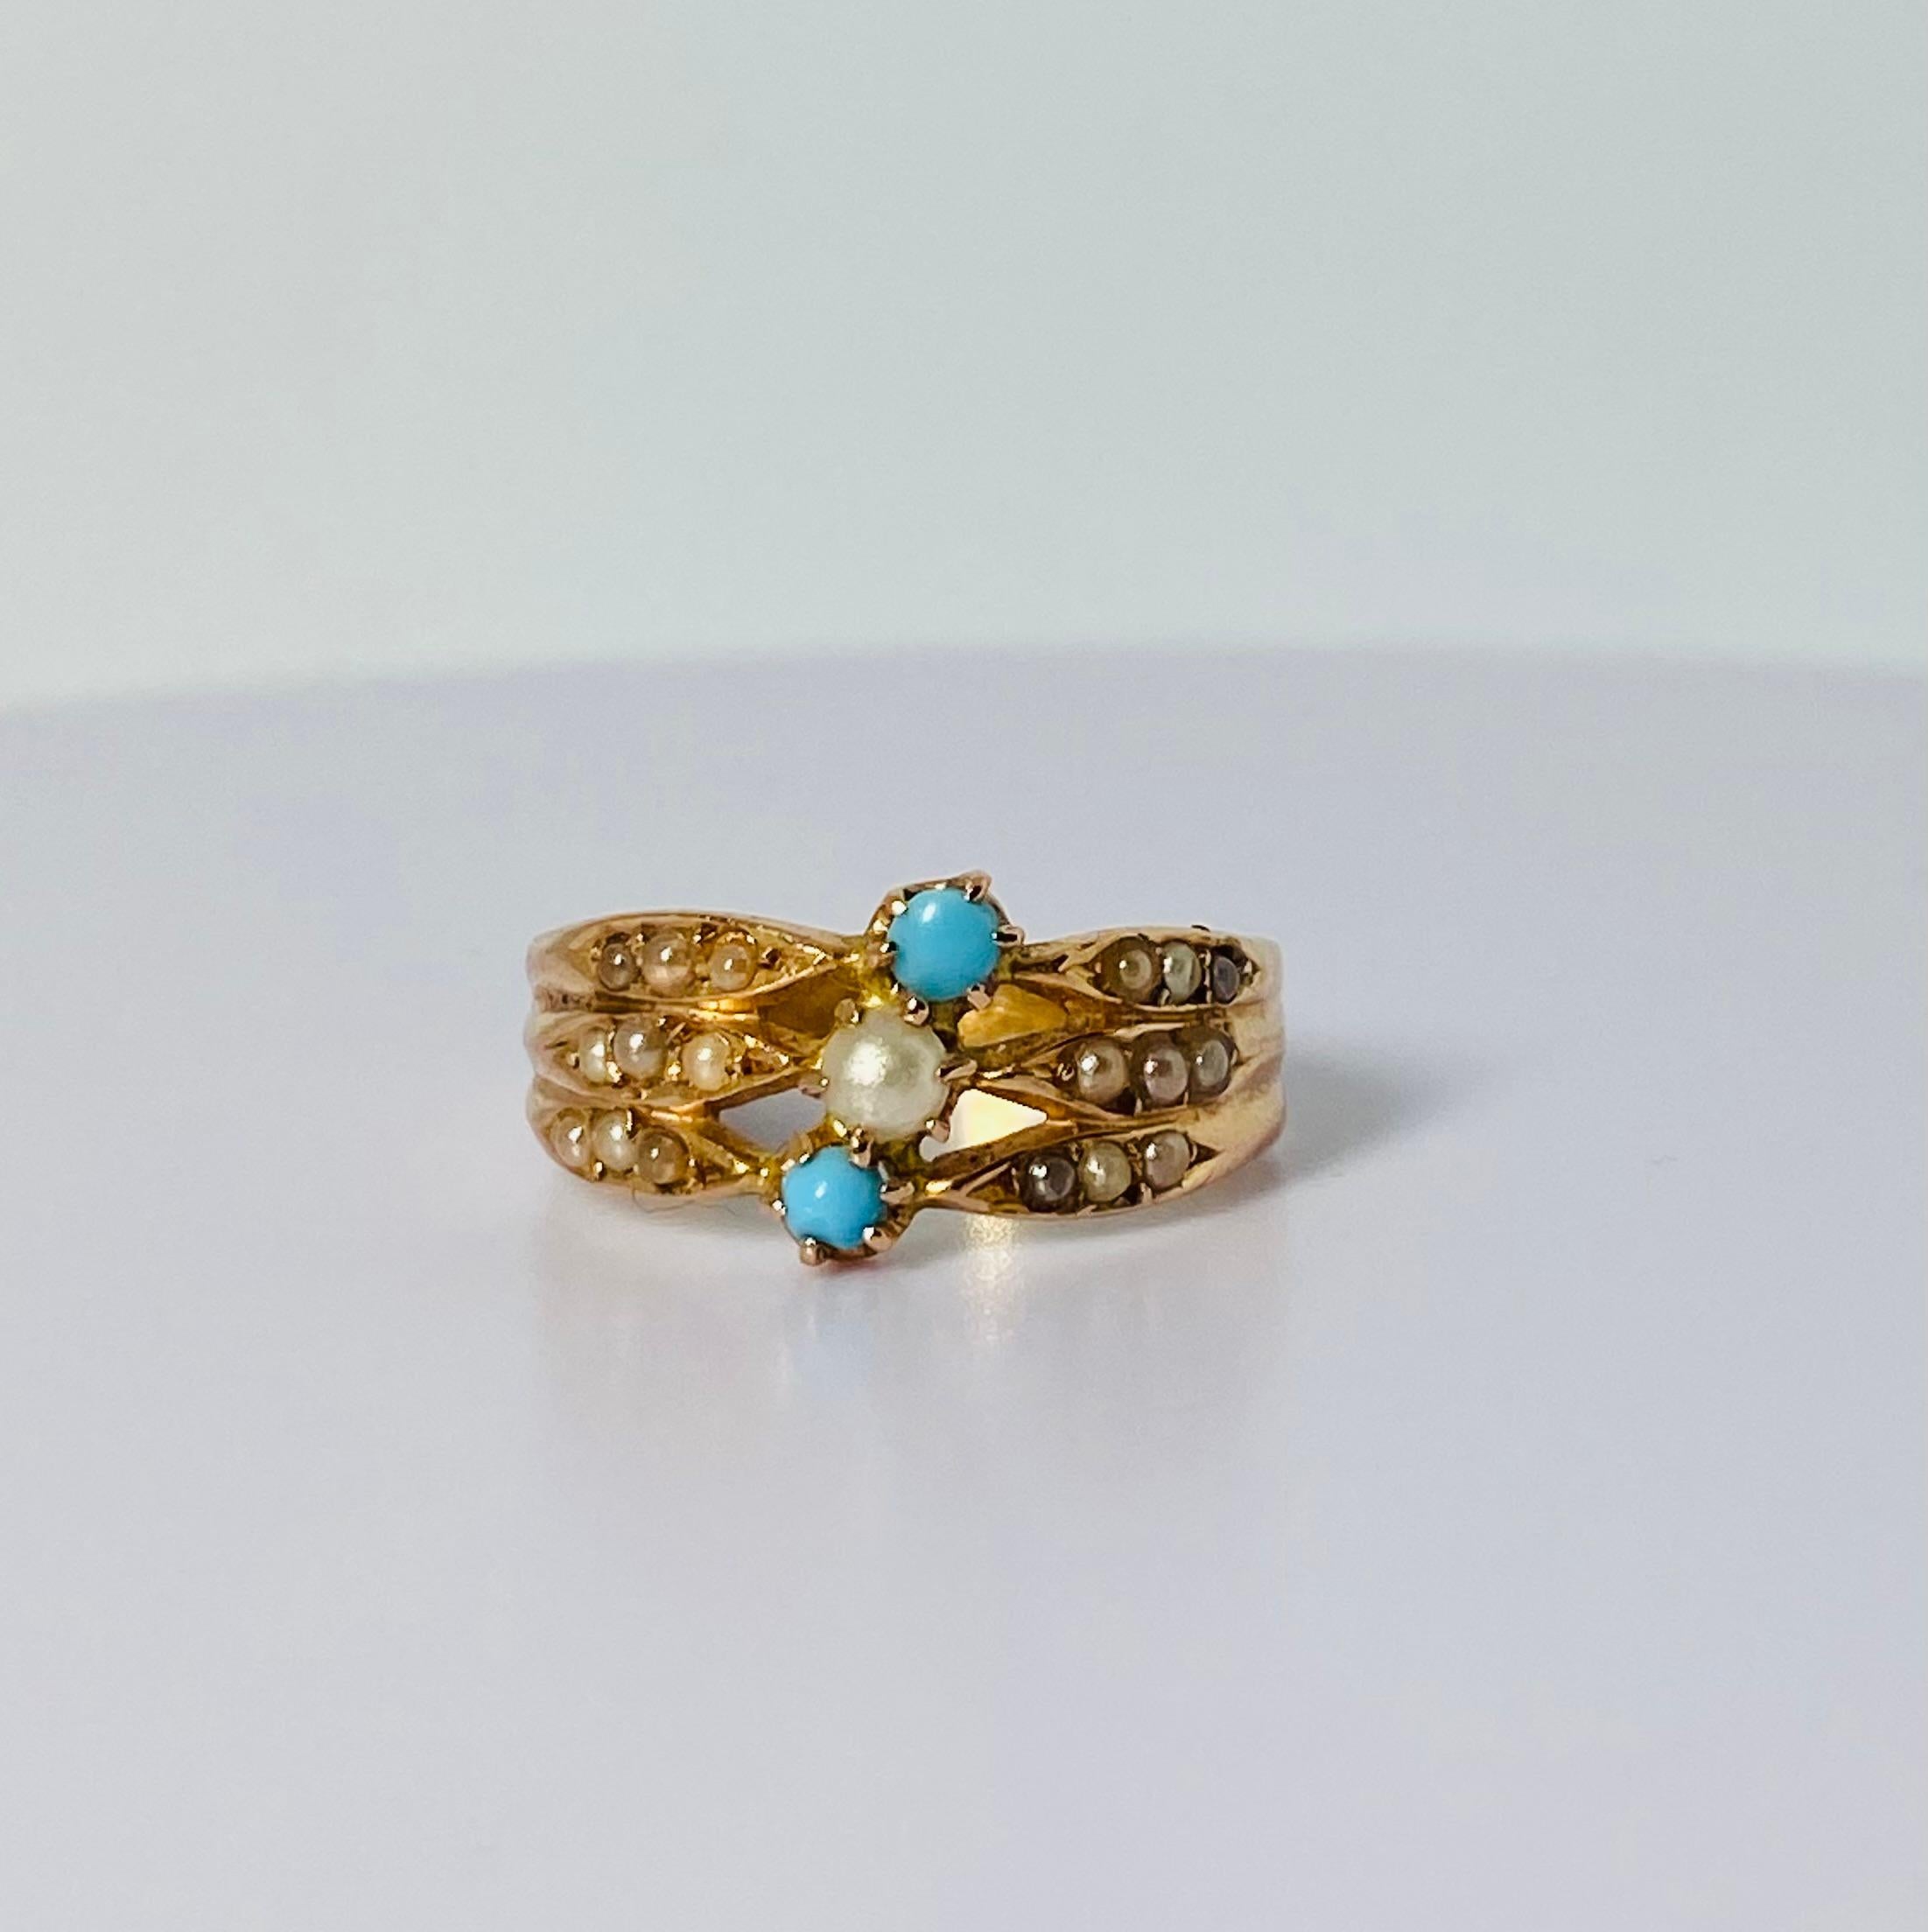 Discover the elegance of this antique ring with turquoises and half seed pears. This stunning ring features 19 man-made half seed stone pearls and two turquoises. The combination of the stones creates a sparkling whole. The ring band is made of high